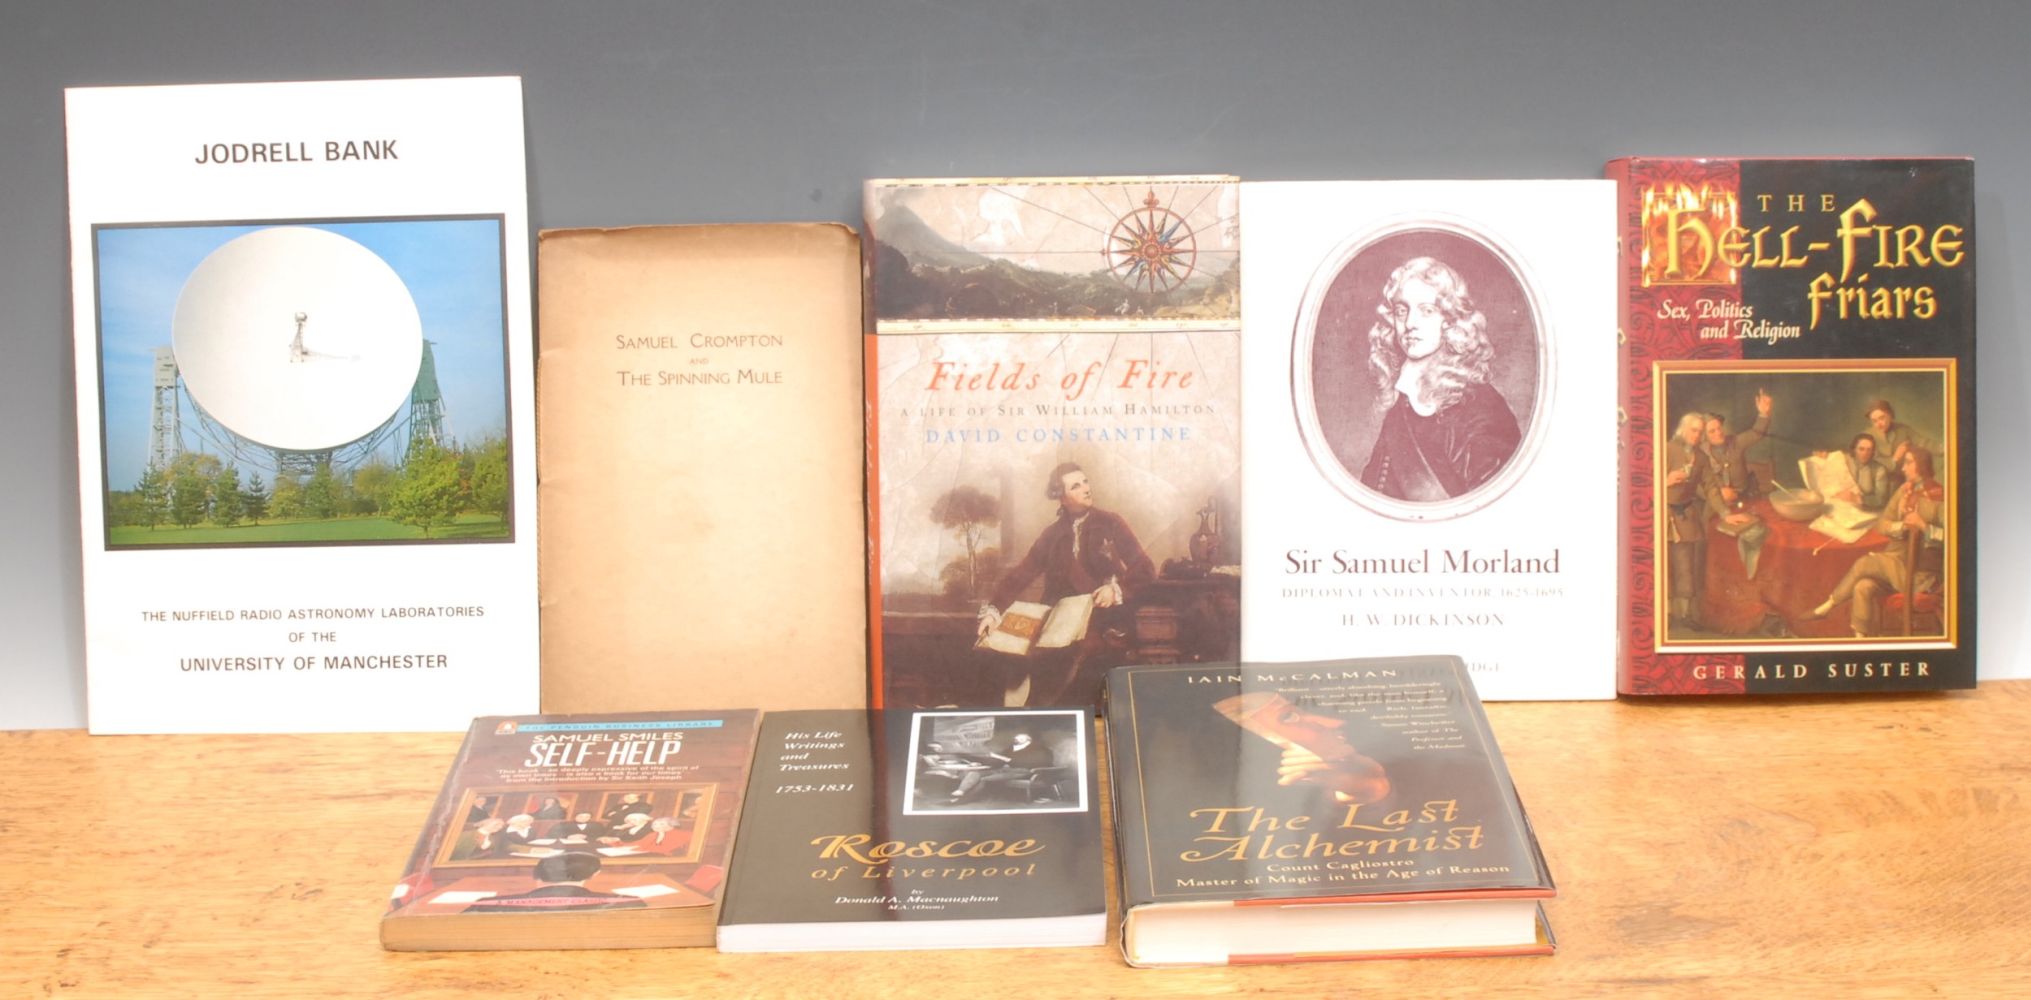 Enlightenment biographies – Constantine (David), Fields of Fire: A Life of Sir William Hamilton, - Image 2 of 2